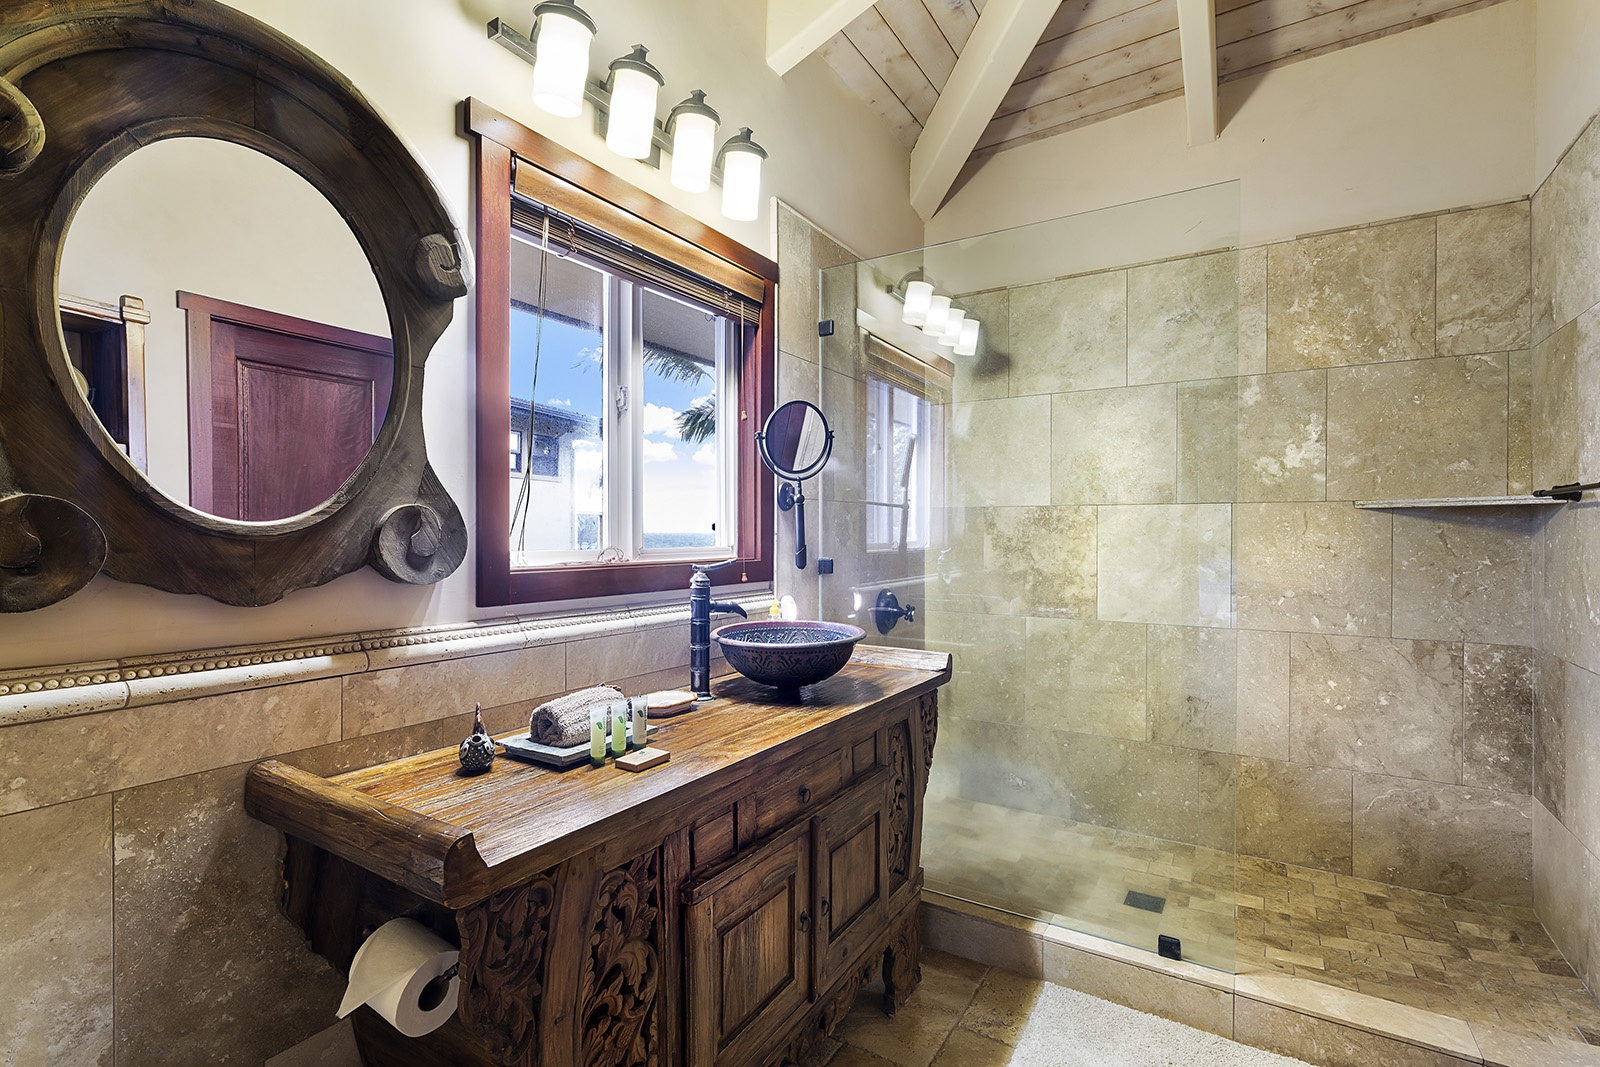 Kailua Kona Vacation Rentals, Mermaid Cove - Guest bathroom with access from the hall and the room